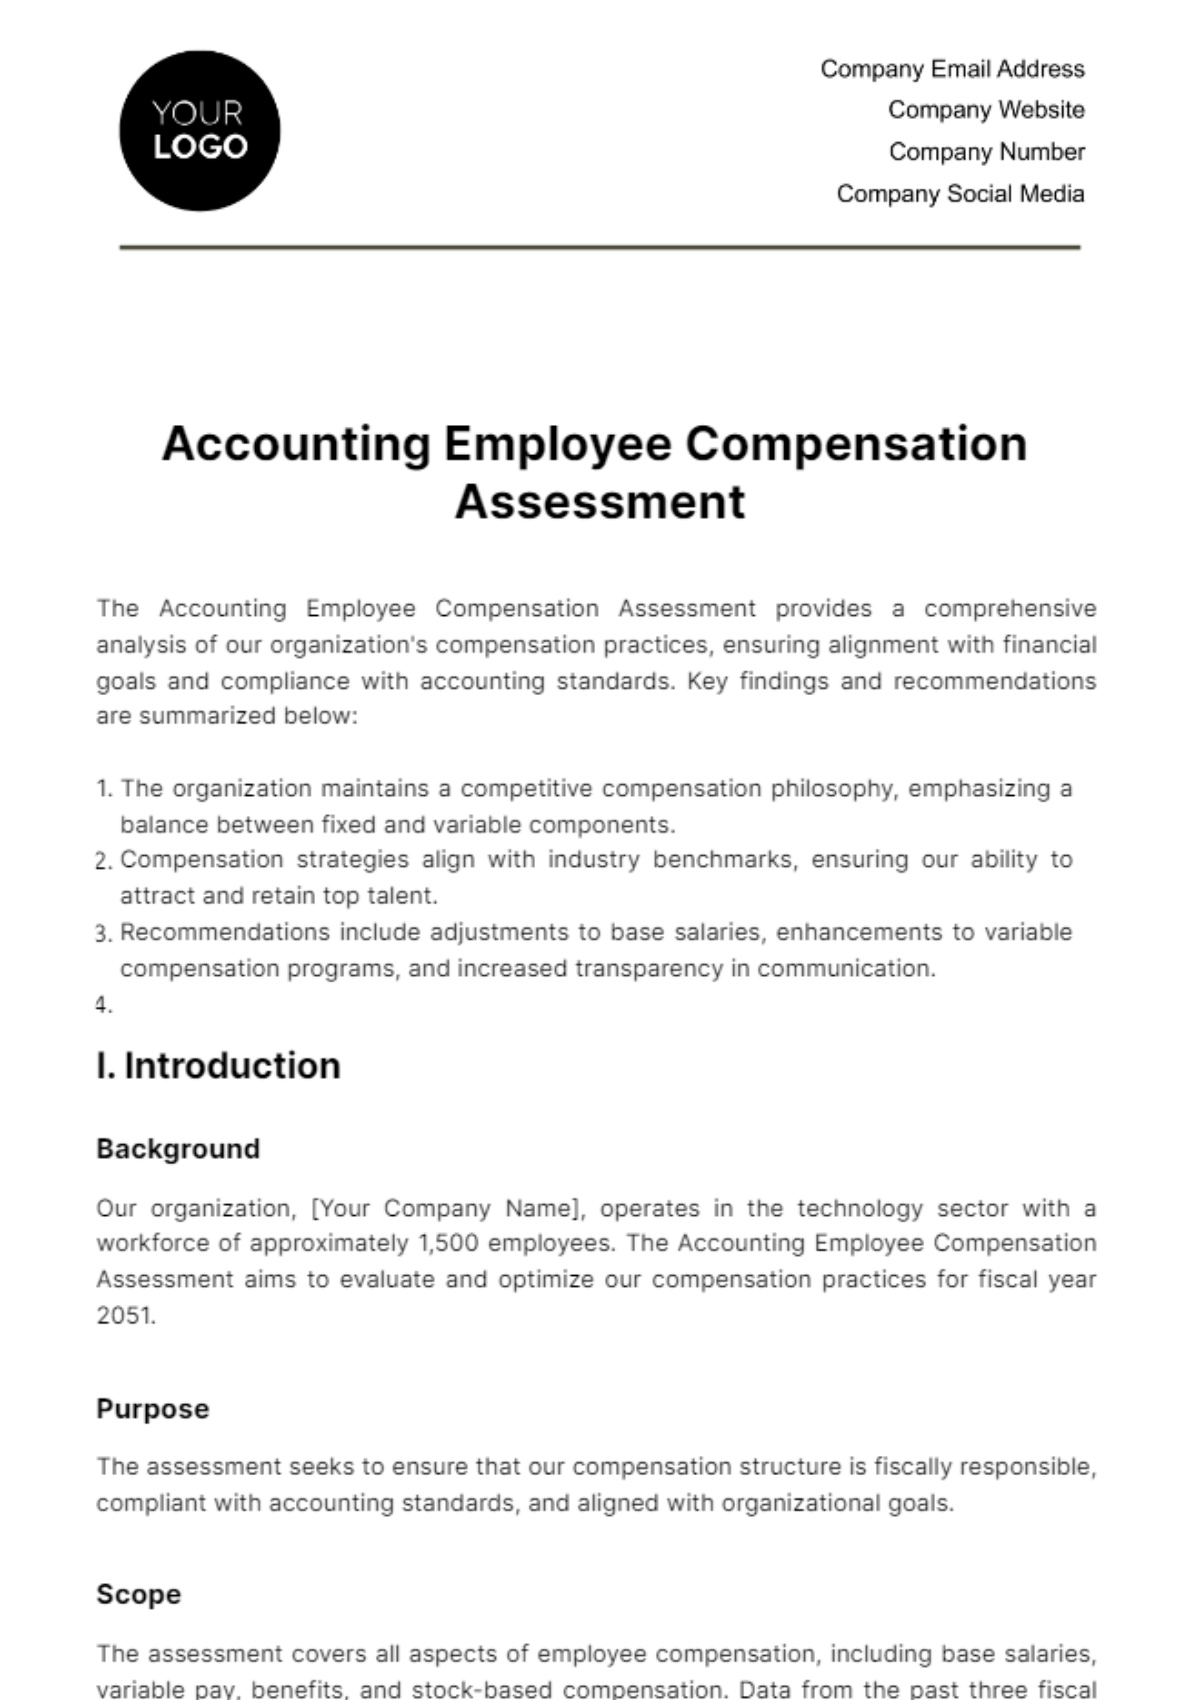 Accounting Employee Compensation Assessment Template